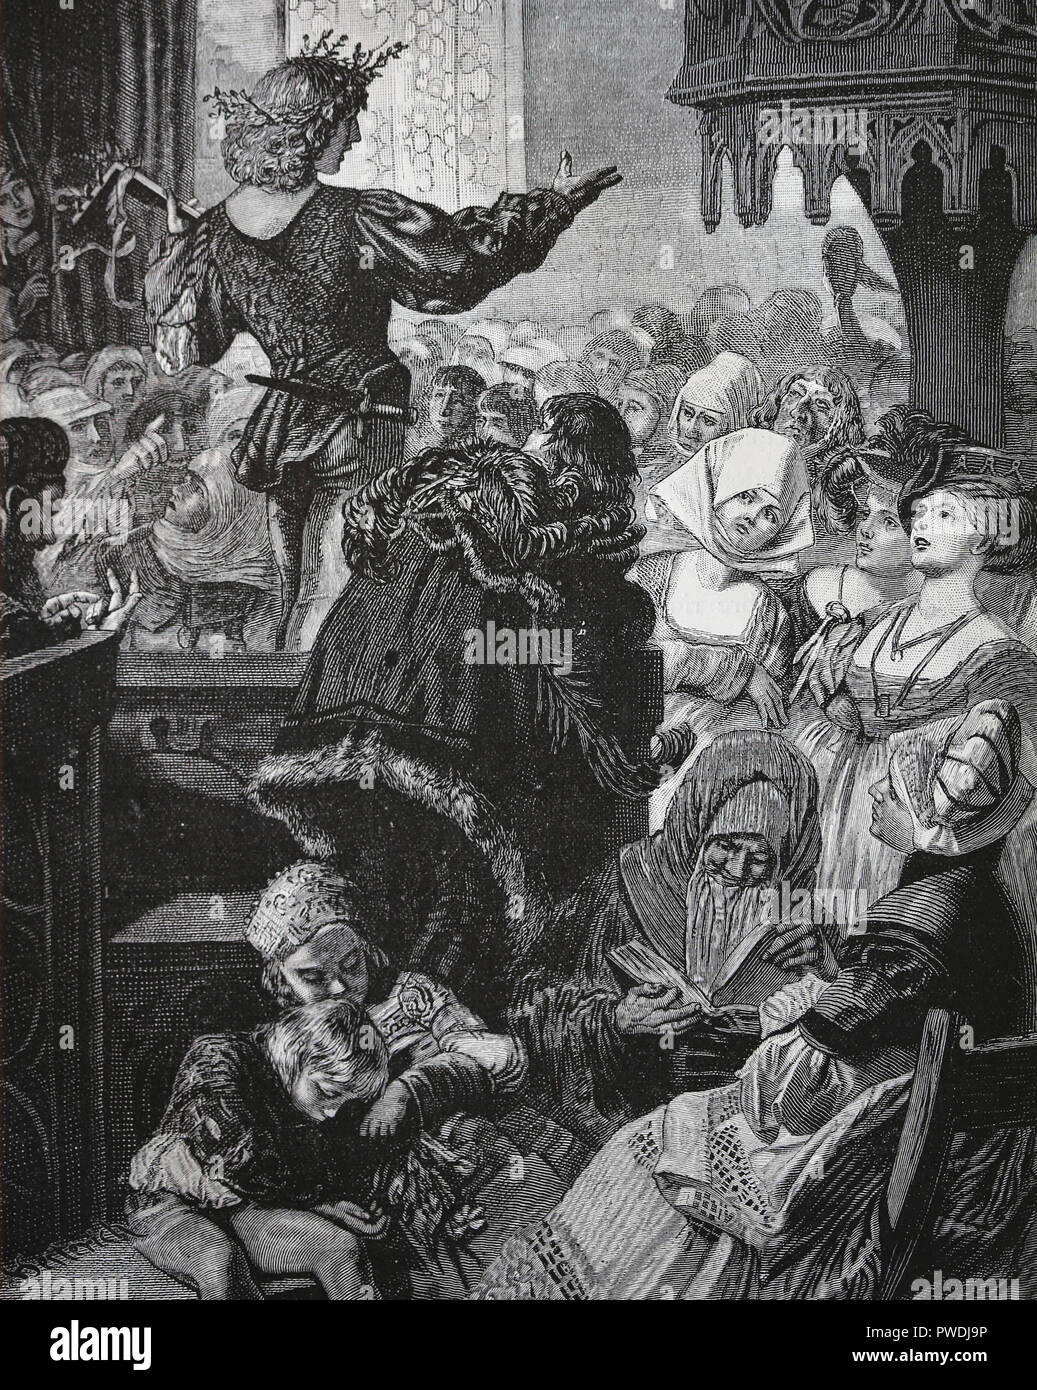 Master singer (Meistersinger). Germany. Contest of music. 14th-16th century. Engraving, 1882. Stock Photo